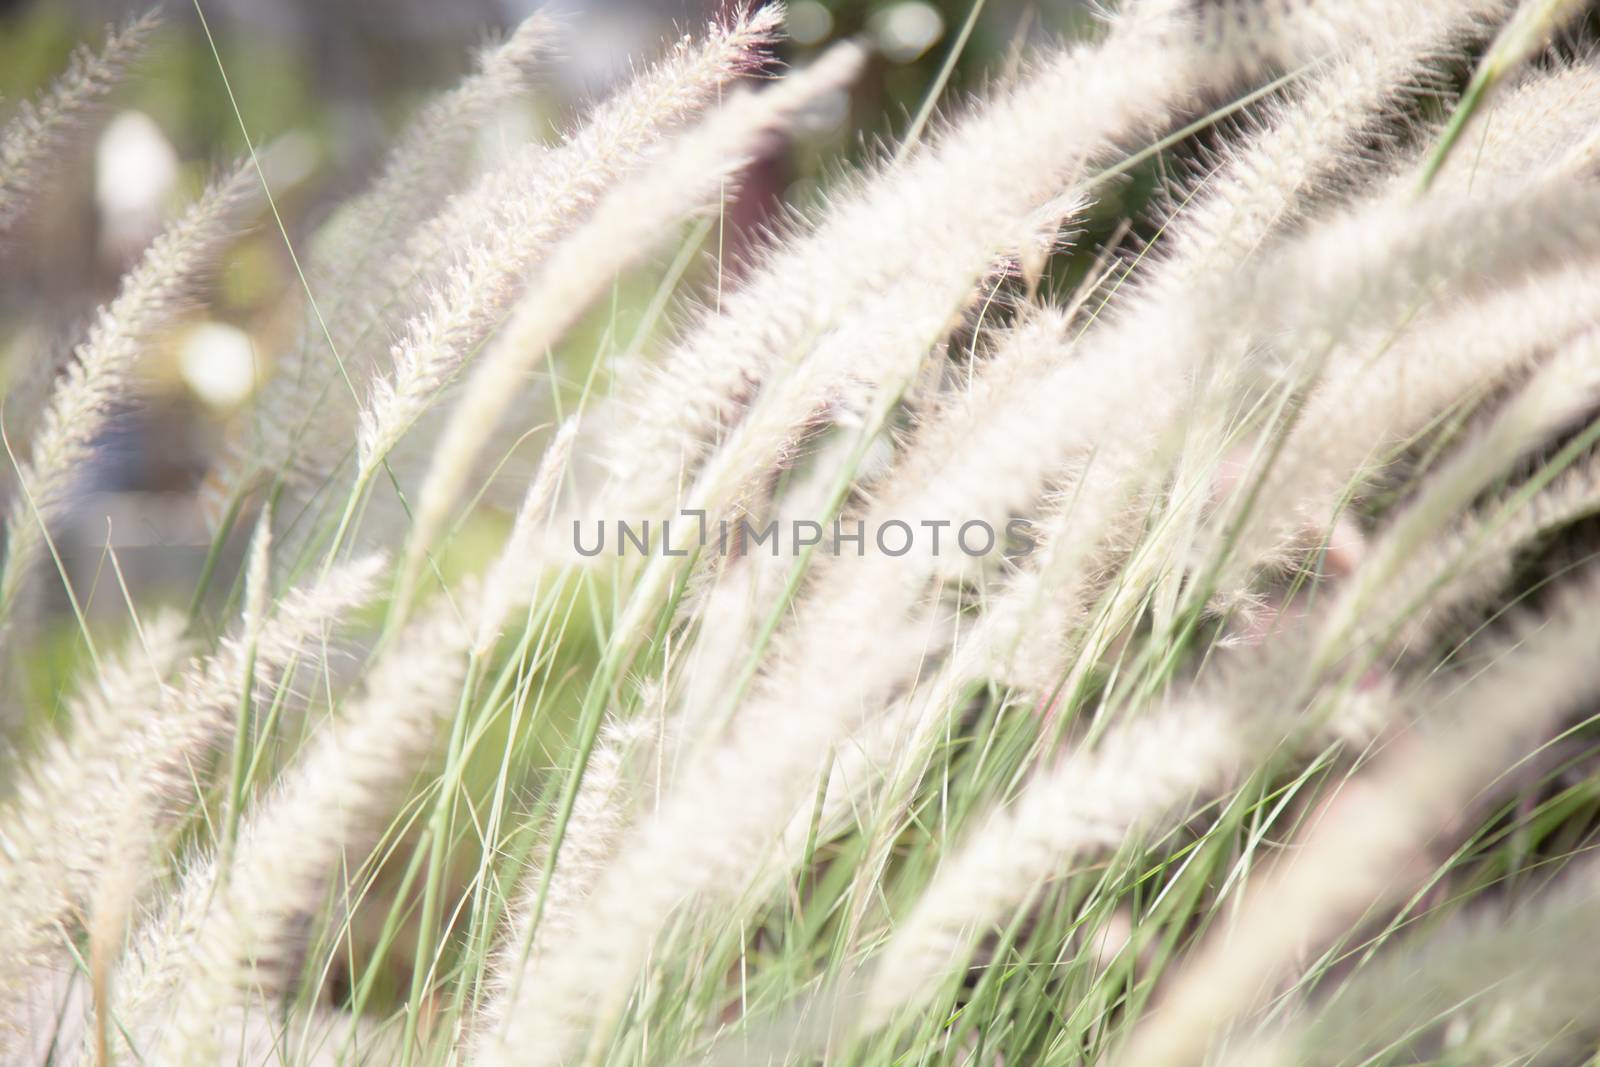 Flower of grass by a454